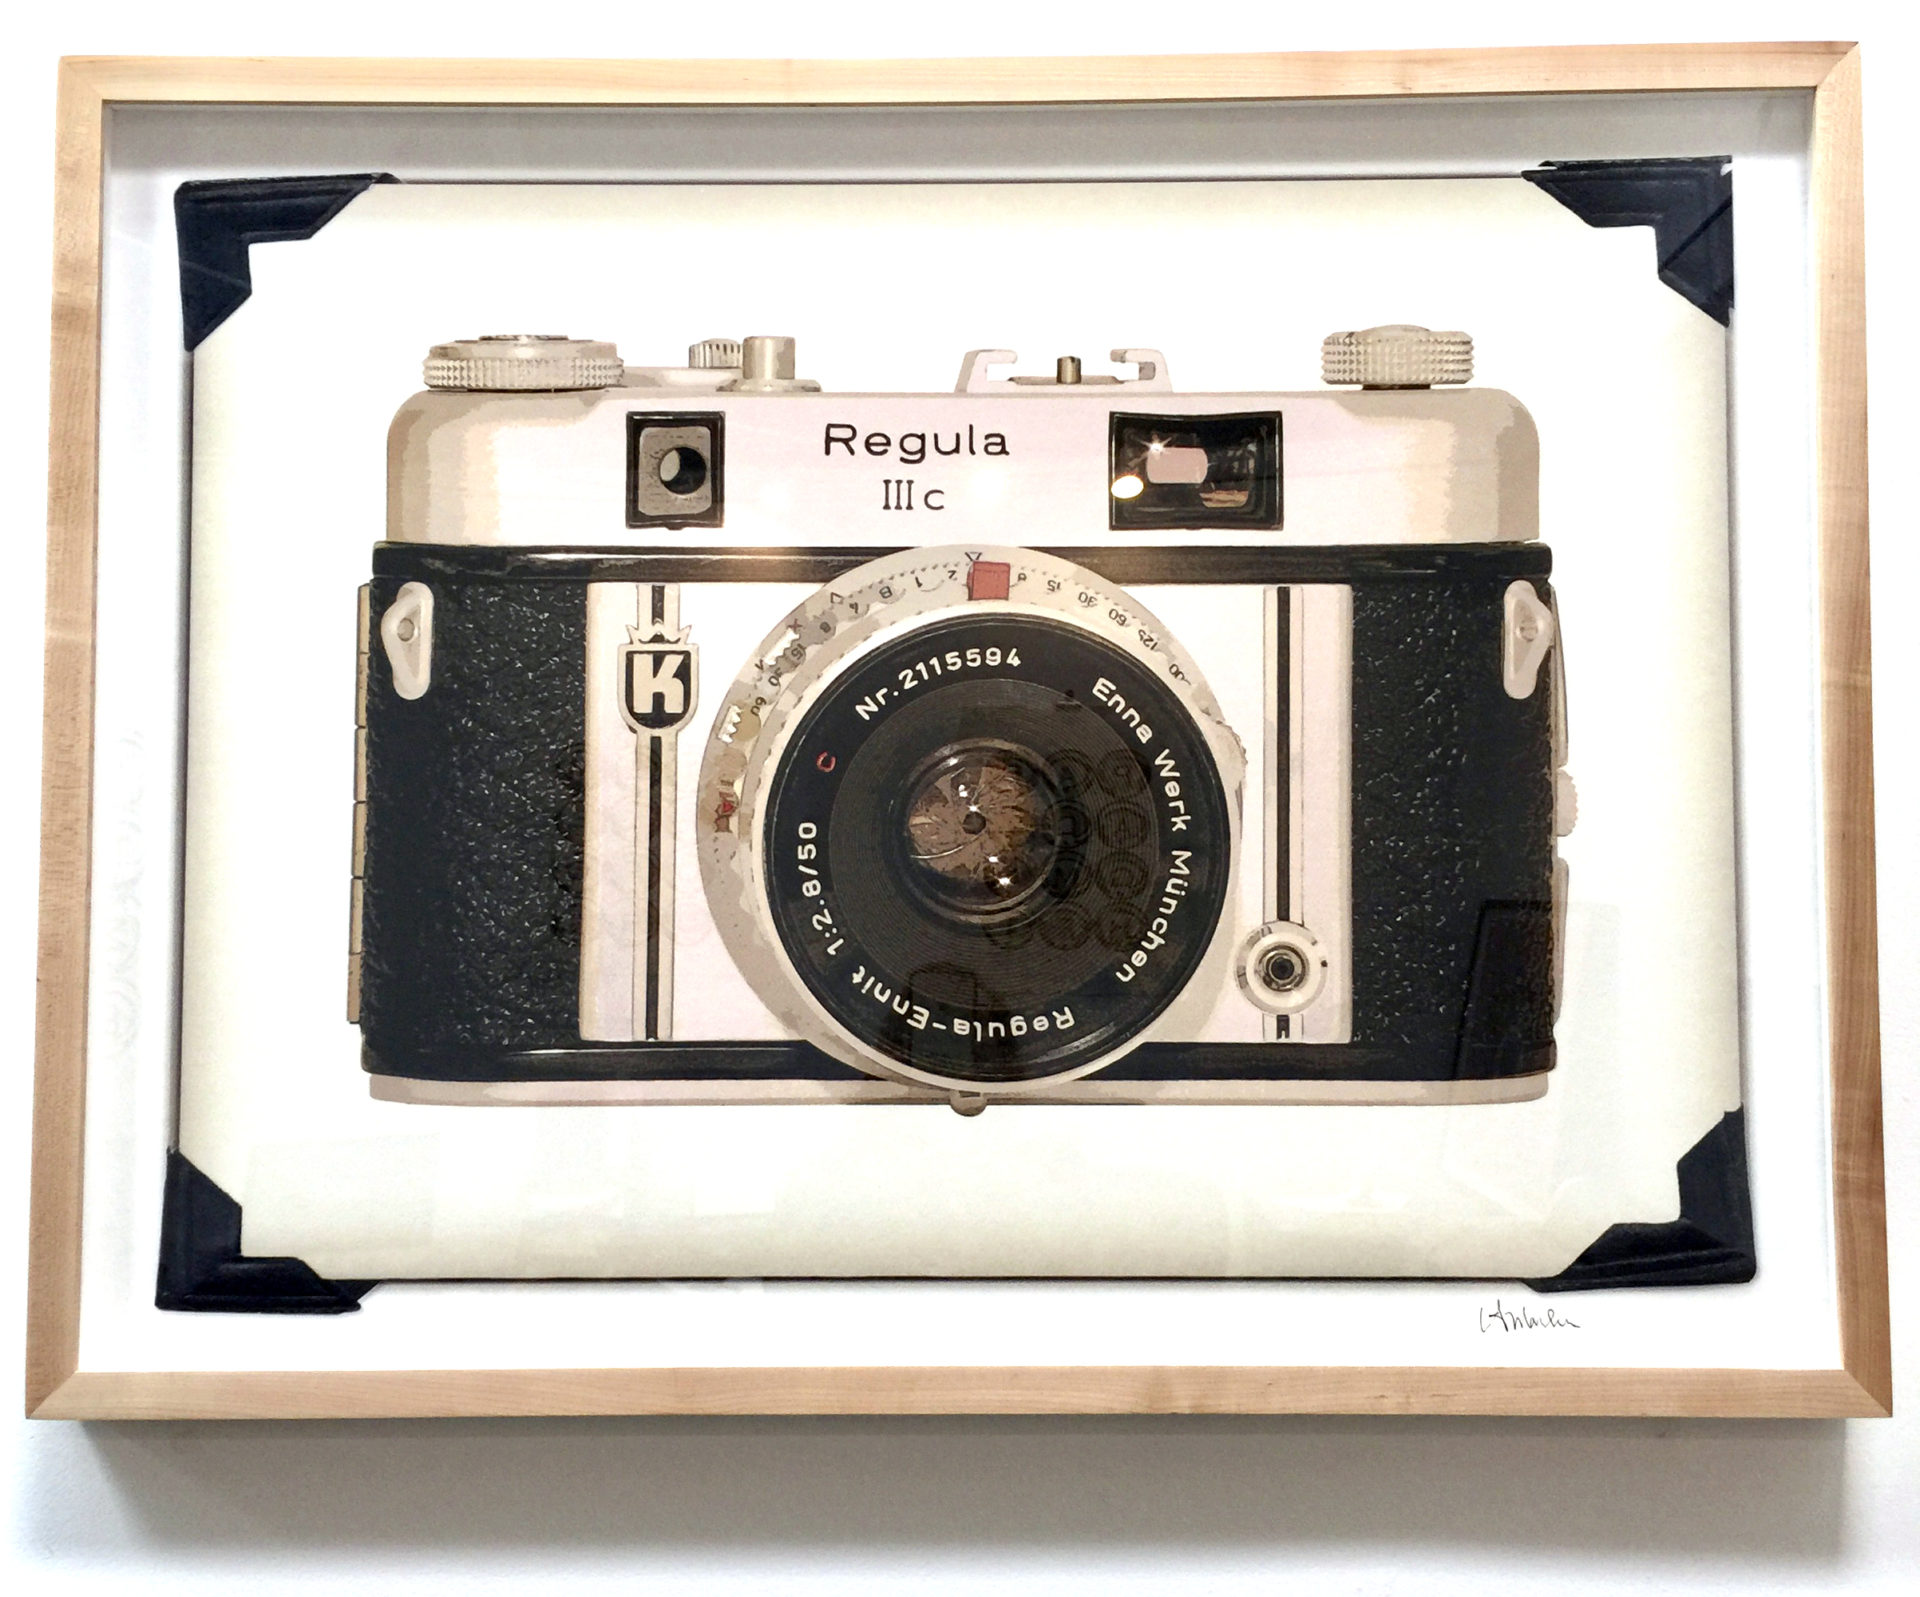 Vintage camera art is photography of cameras. It exemplies the camera centric era we live in now.